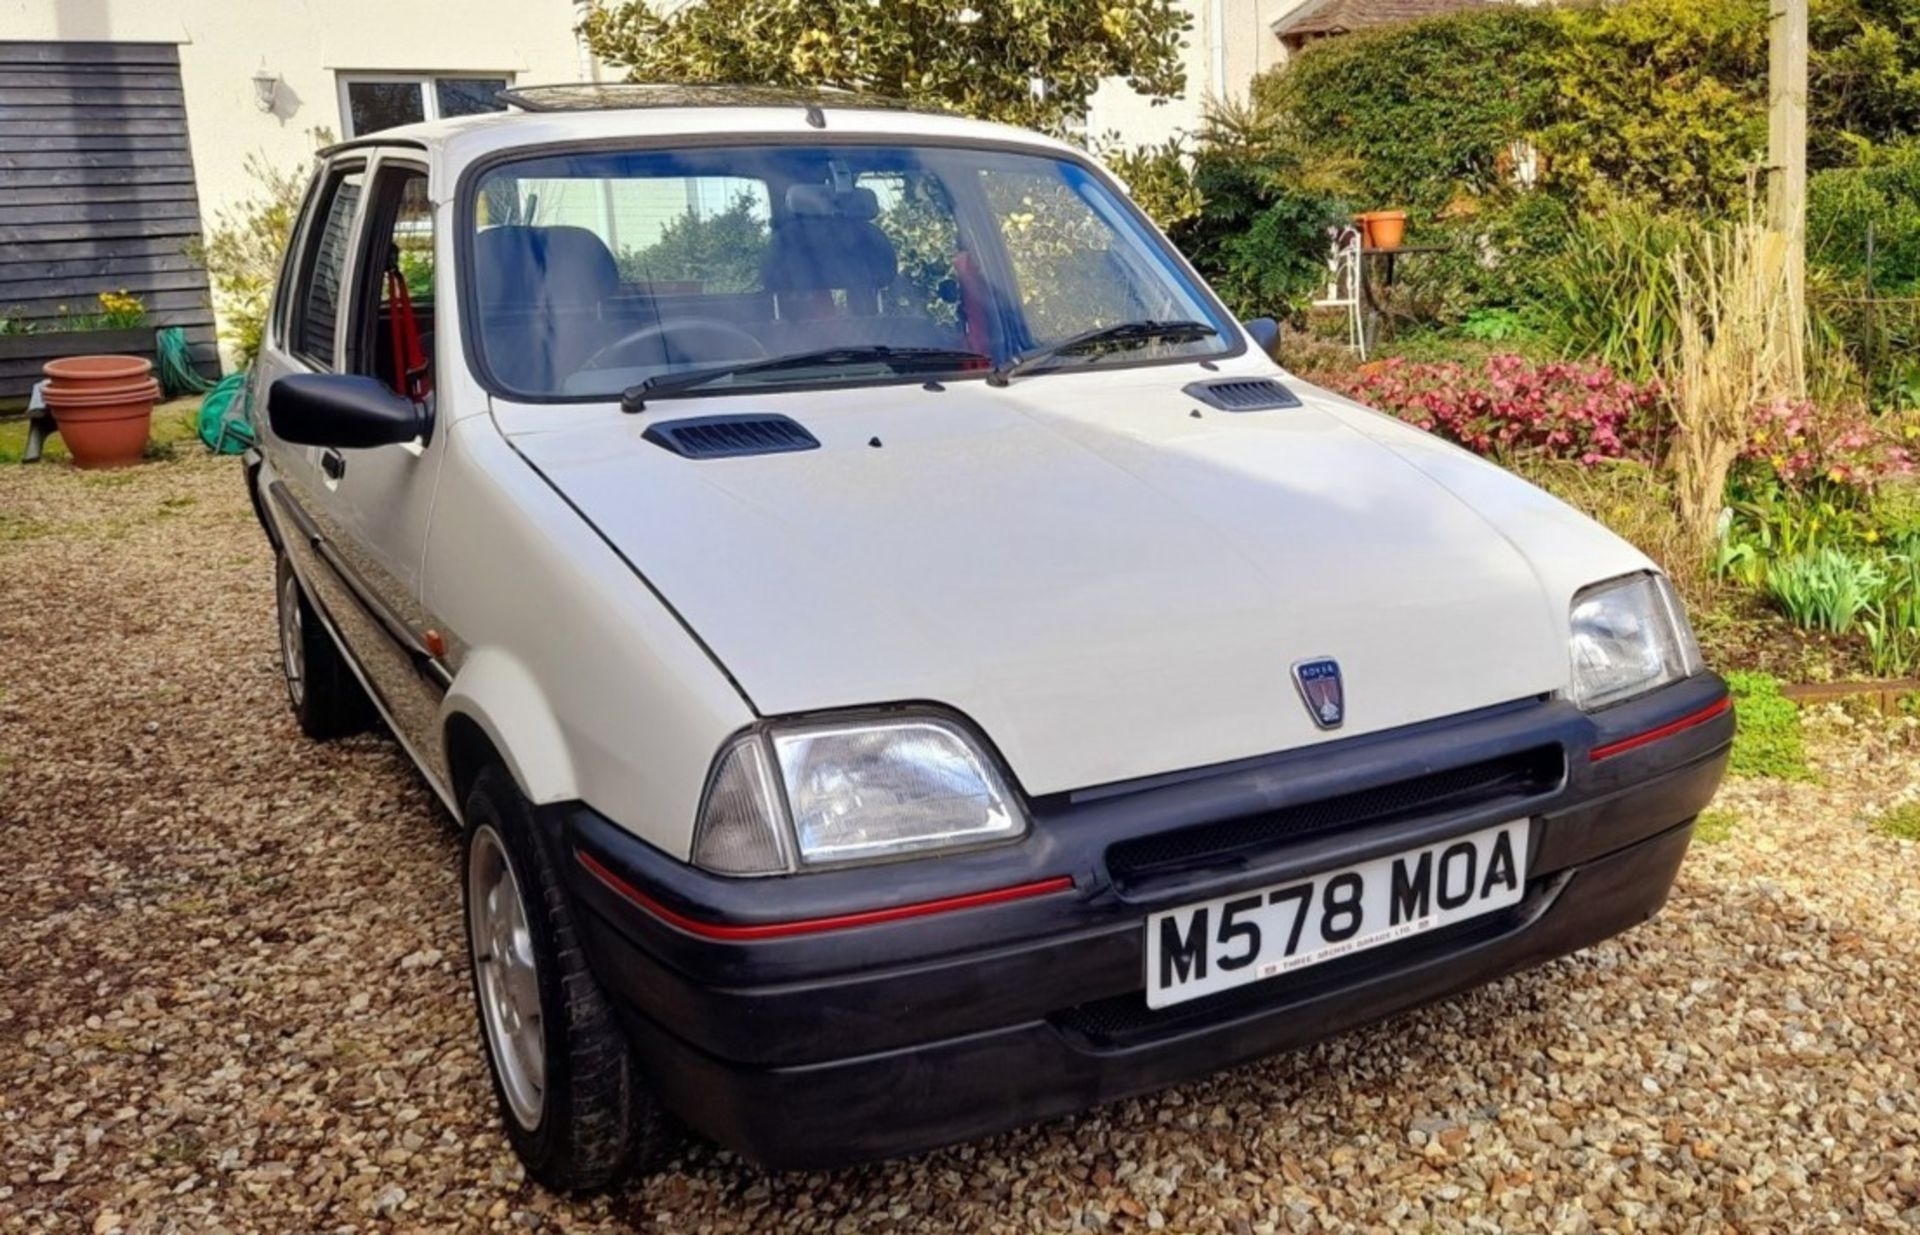 1994 Rover Metro GTa Registration number M578 MOA Chassis number SAXXPMWWEAD920638 Engine number